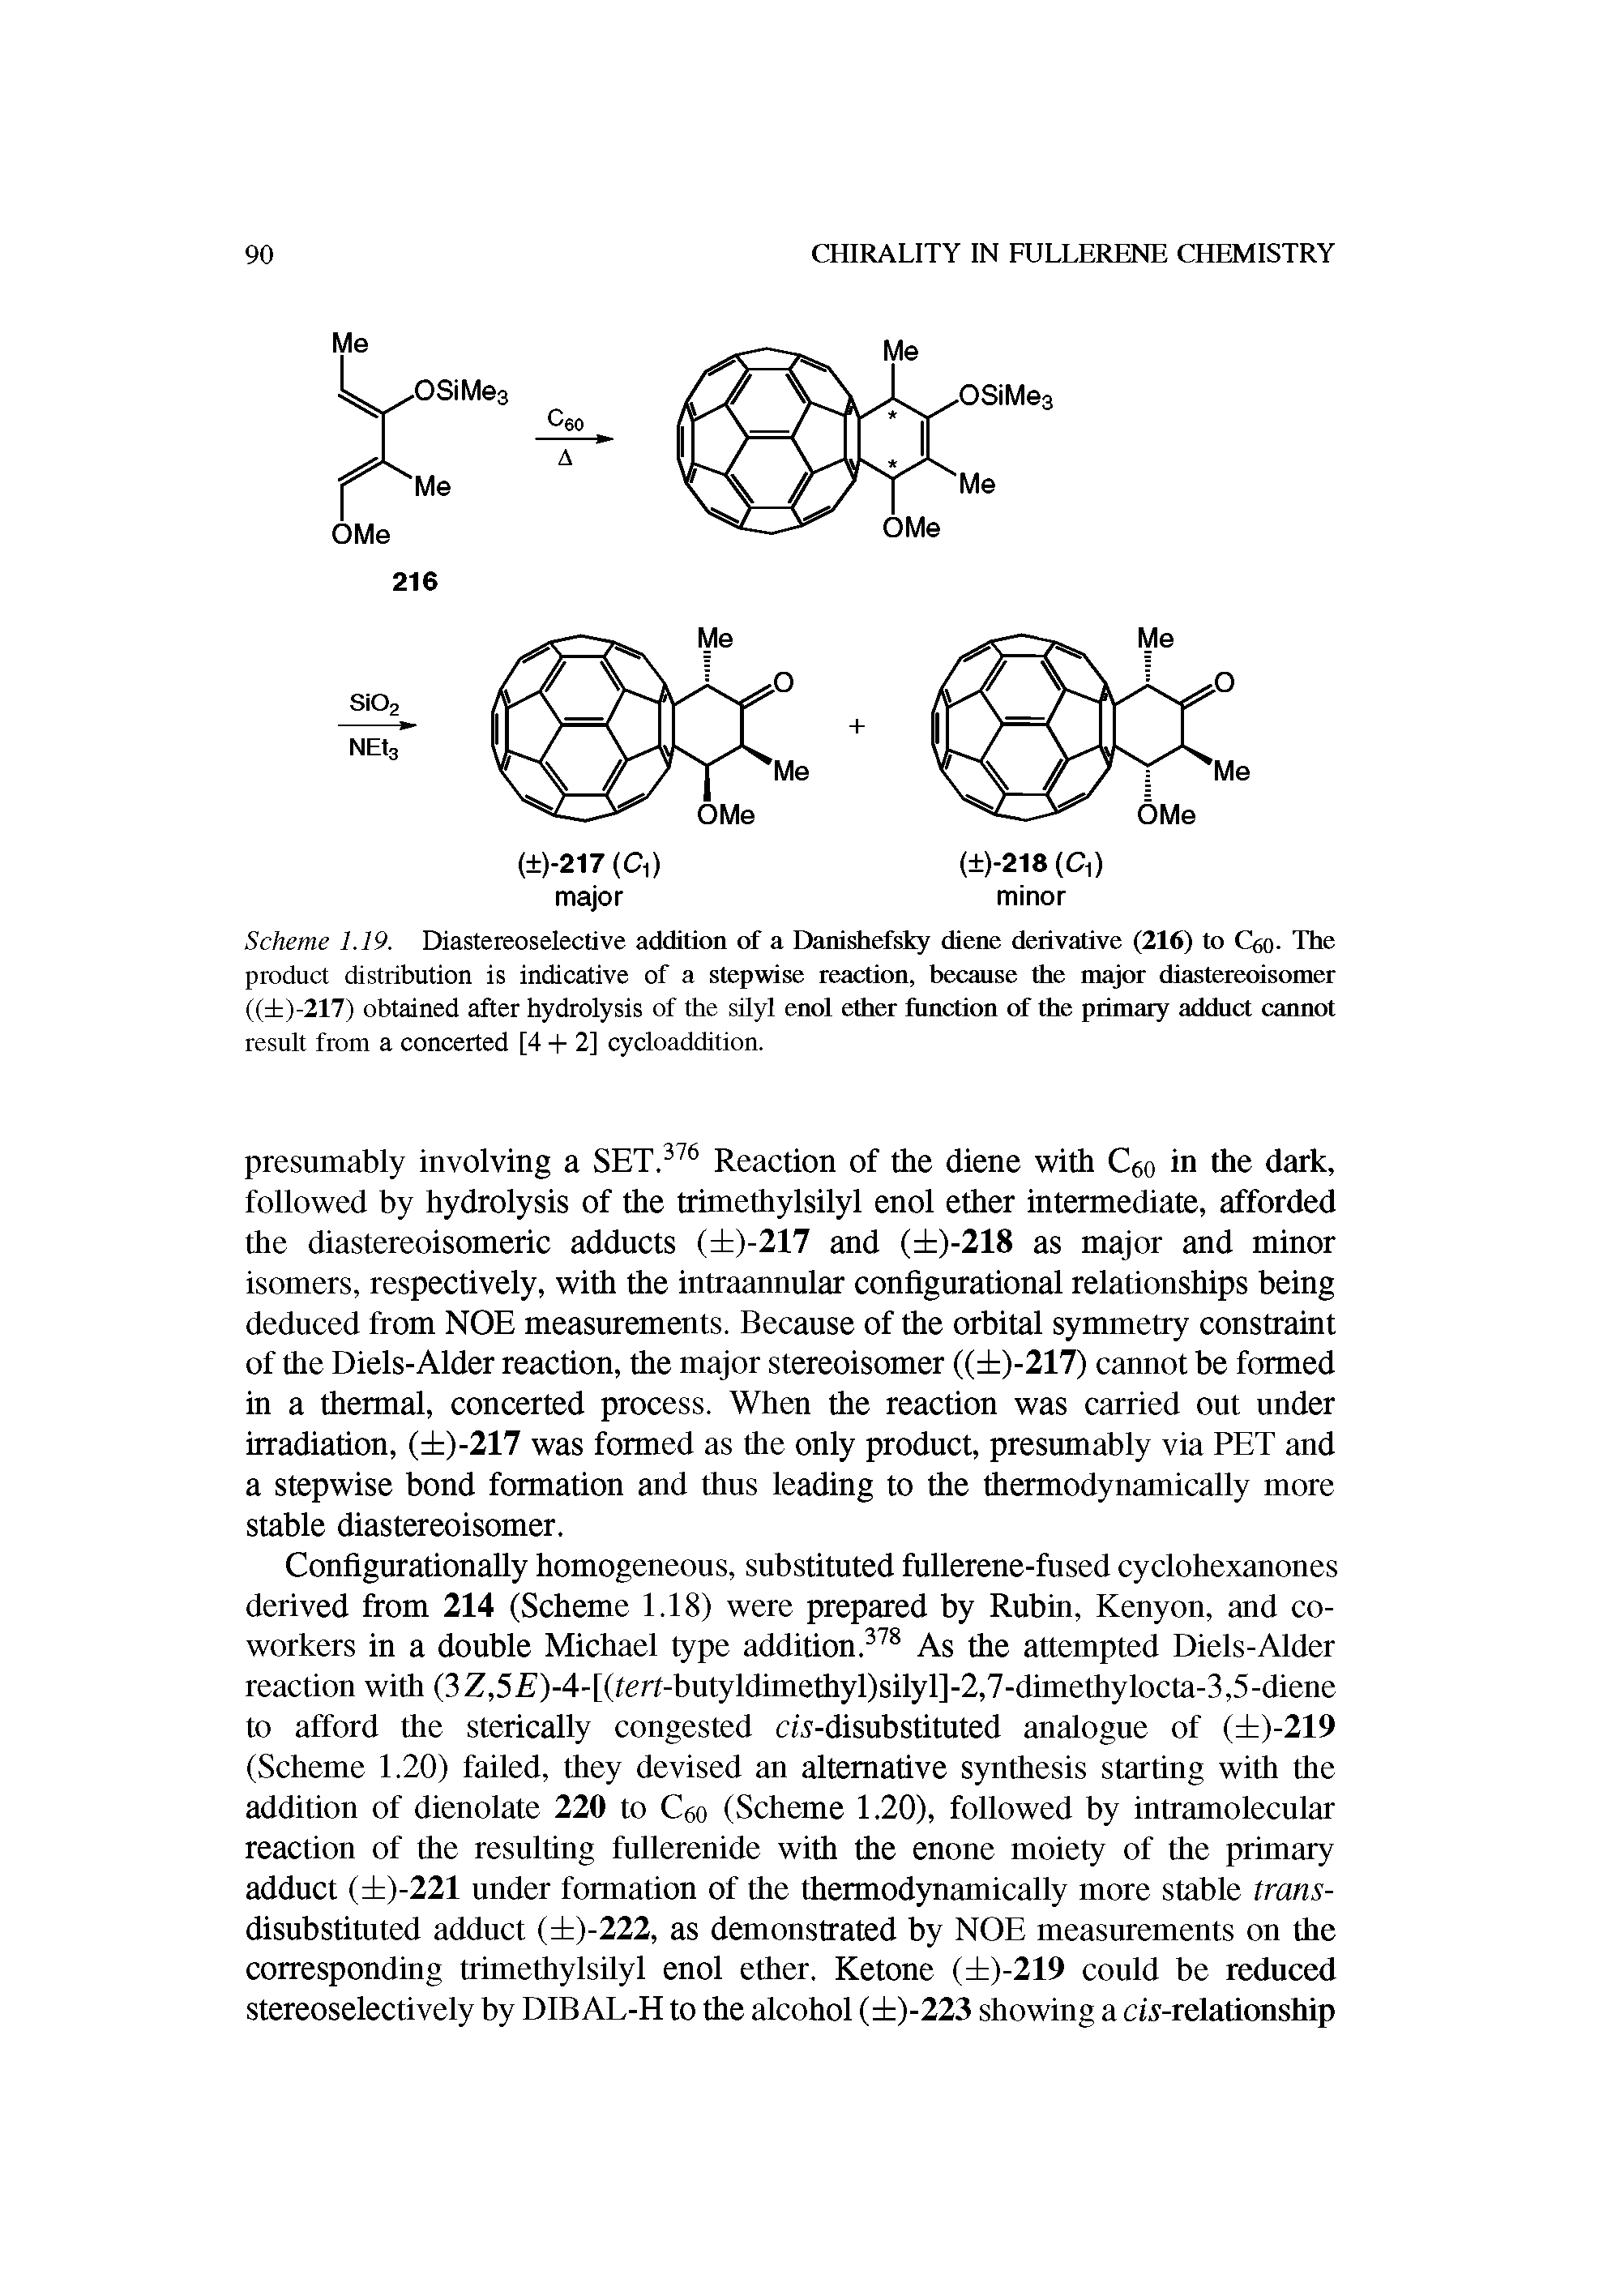 Scheme 1.19. Diastereoselective addition of a Danishefsky diene derivative (216) to (V,o- The product distribution is indicative of a stepwise reaction, because the major diastereoisomer (( )-217) obtained after hydrolysis of the silyl enol ether function of the primary adduct cannot result from a concerted [4 + 2] cycloaddition.